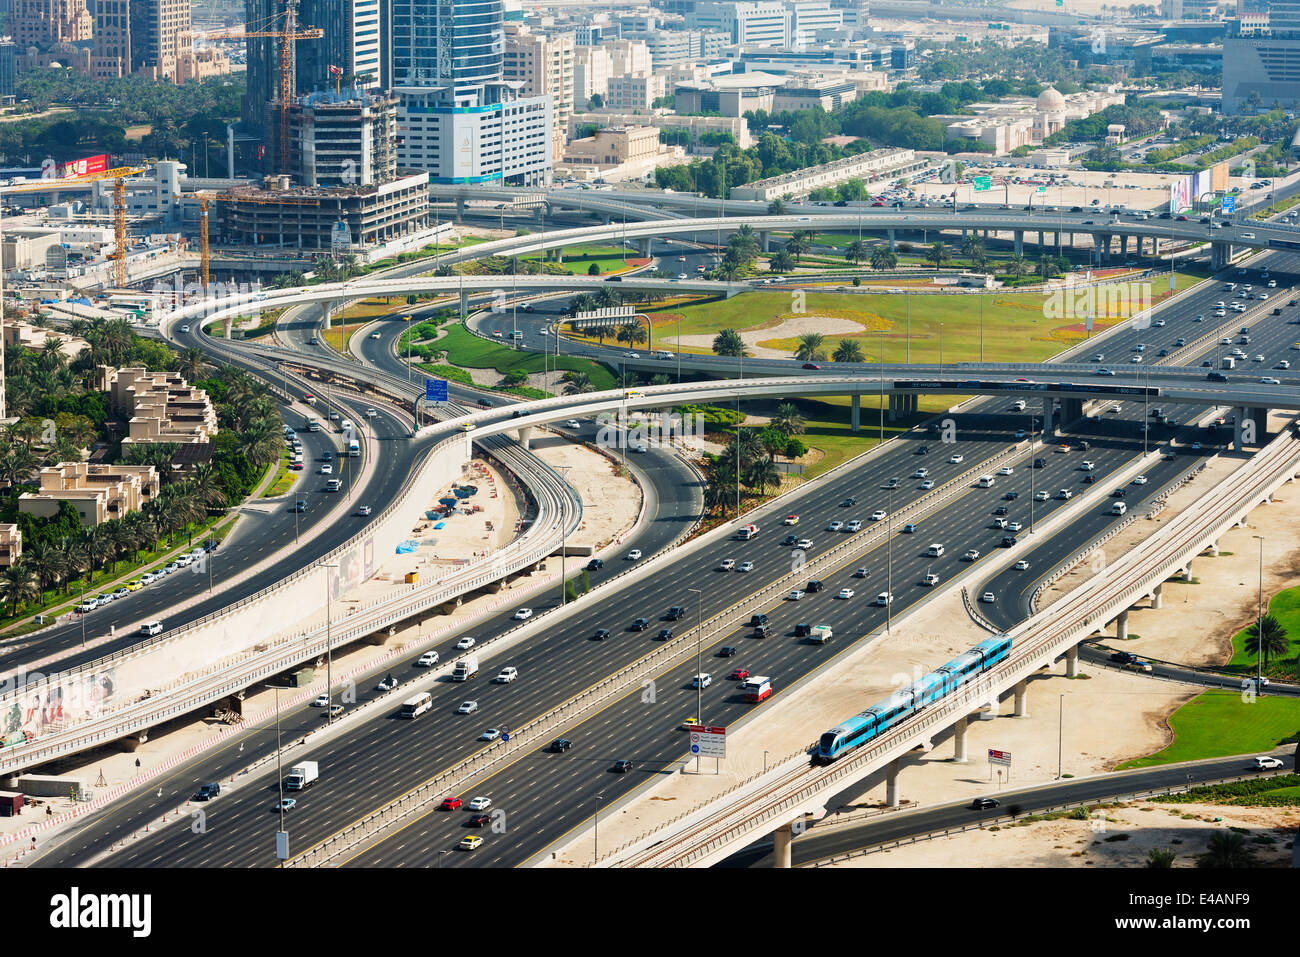 Middle East, United Arab Emirates, Dubai, highway and flyovers Stock Photo